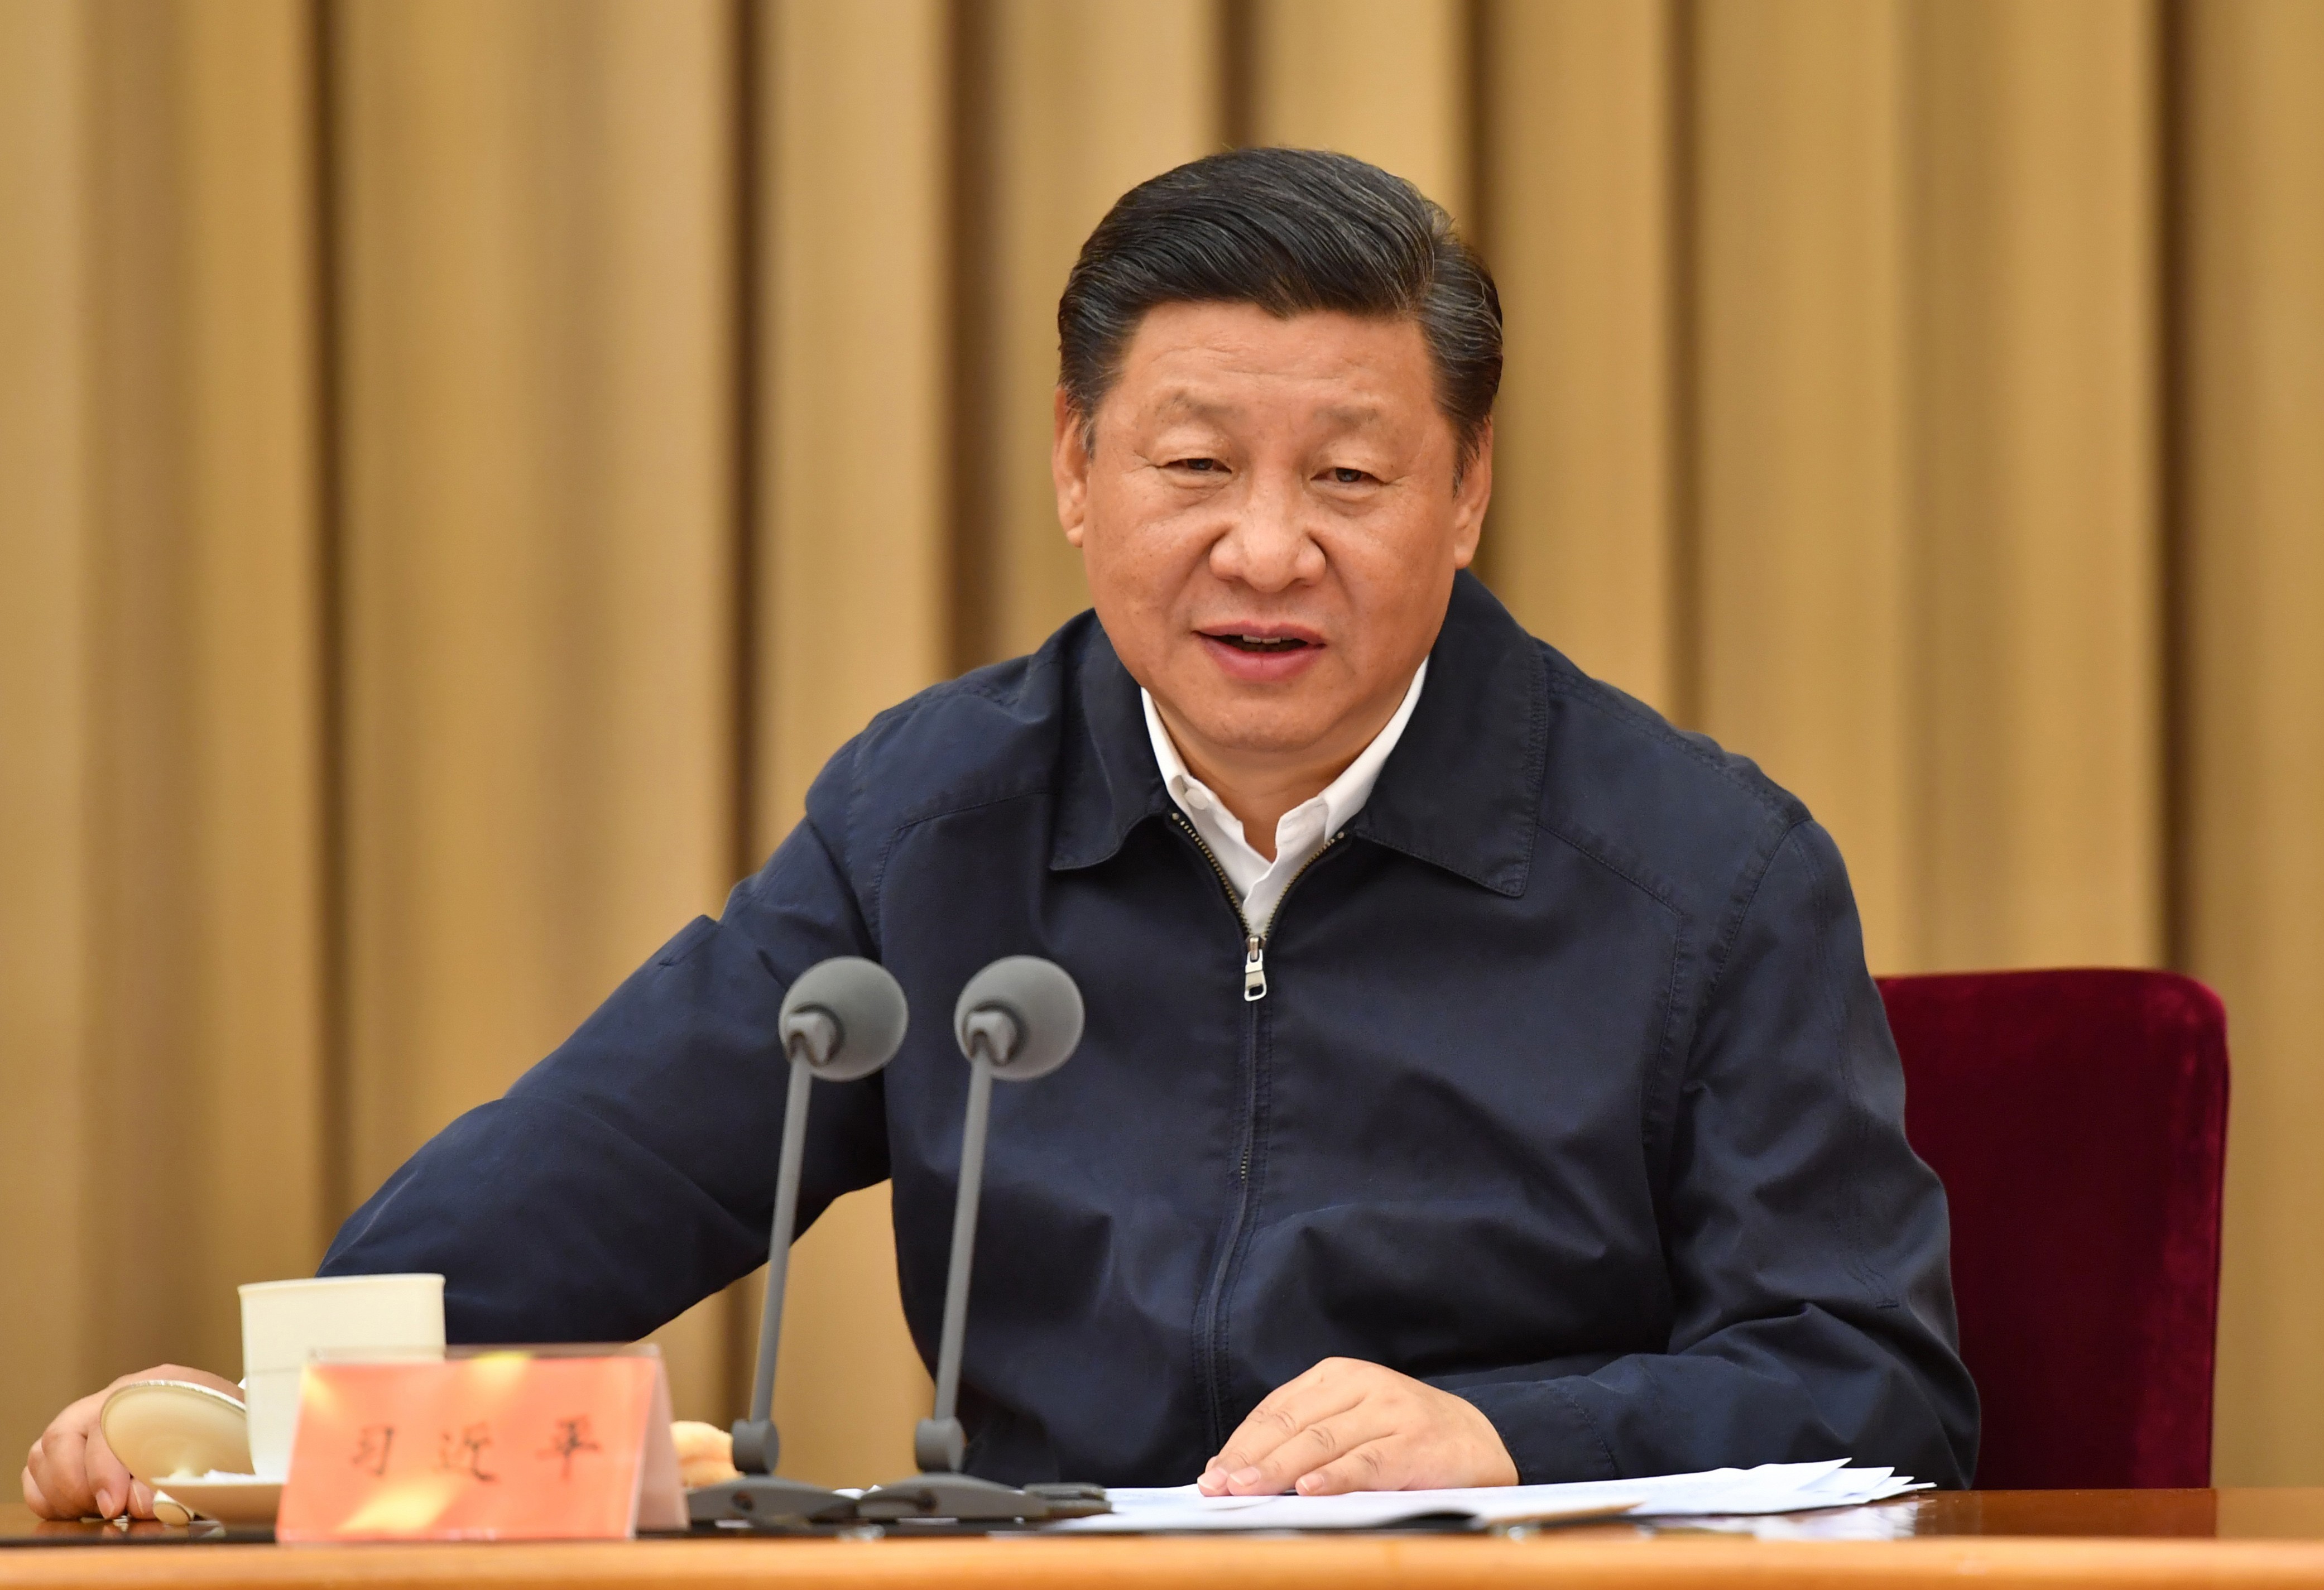 President Xi Jinping addresses delegates on the final day of the July 14-15 National Financial Work Conference in Beijing. Photo: Xinhua